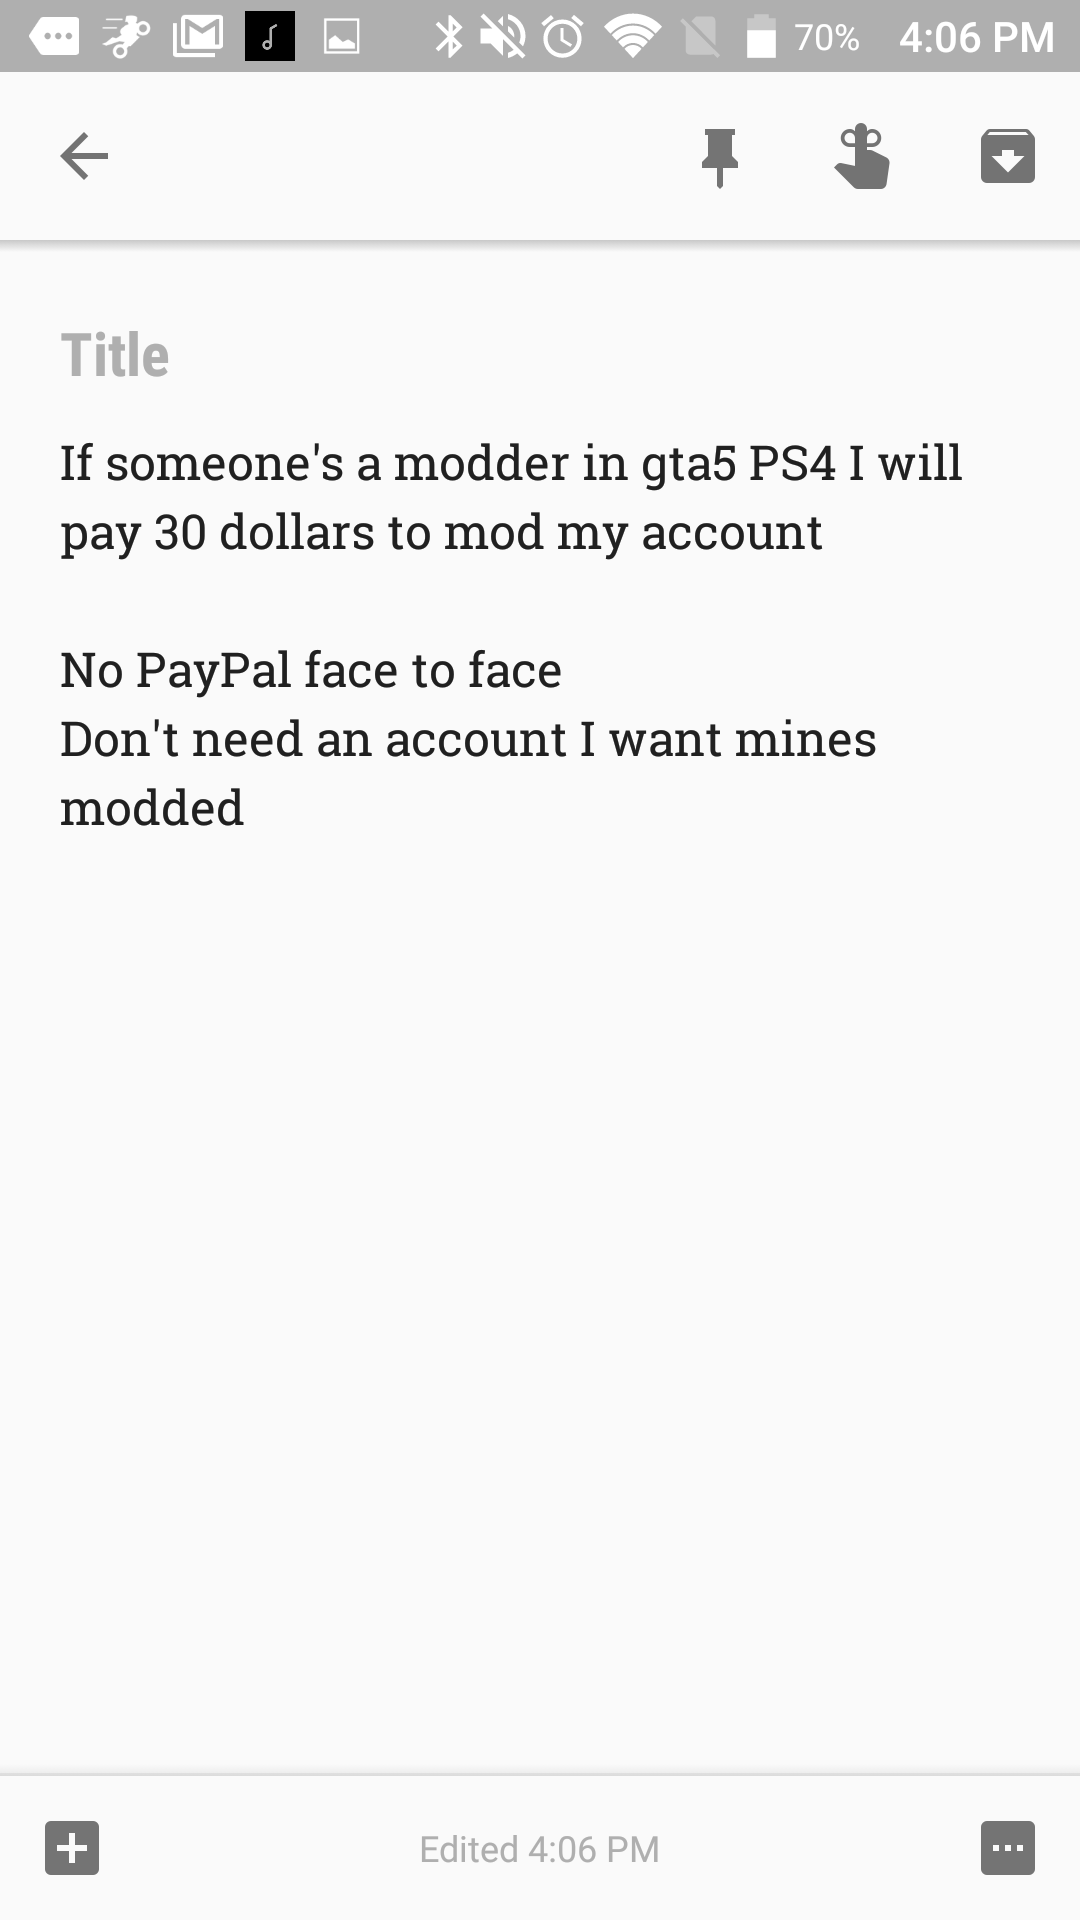 Need MY account modded in gta5